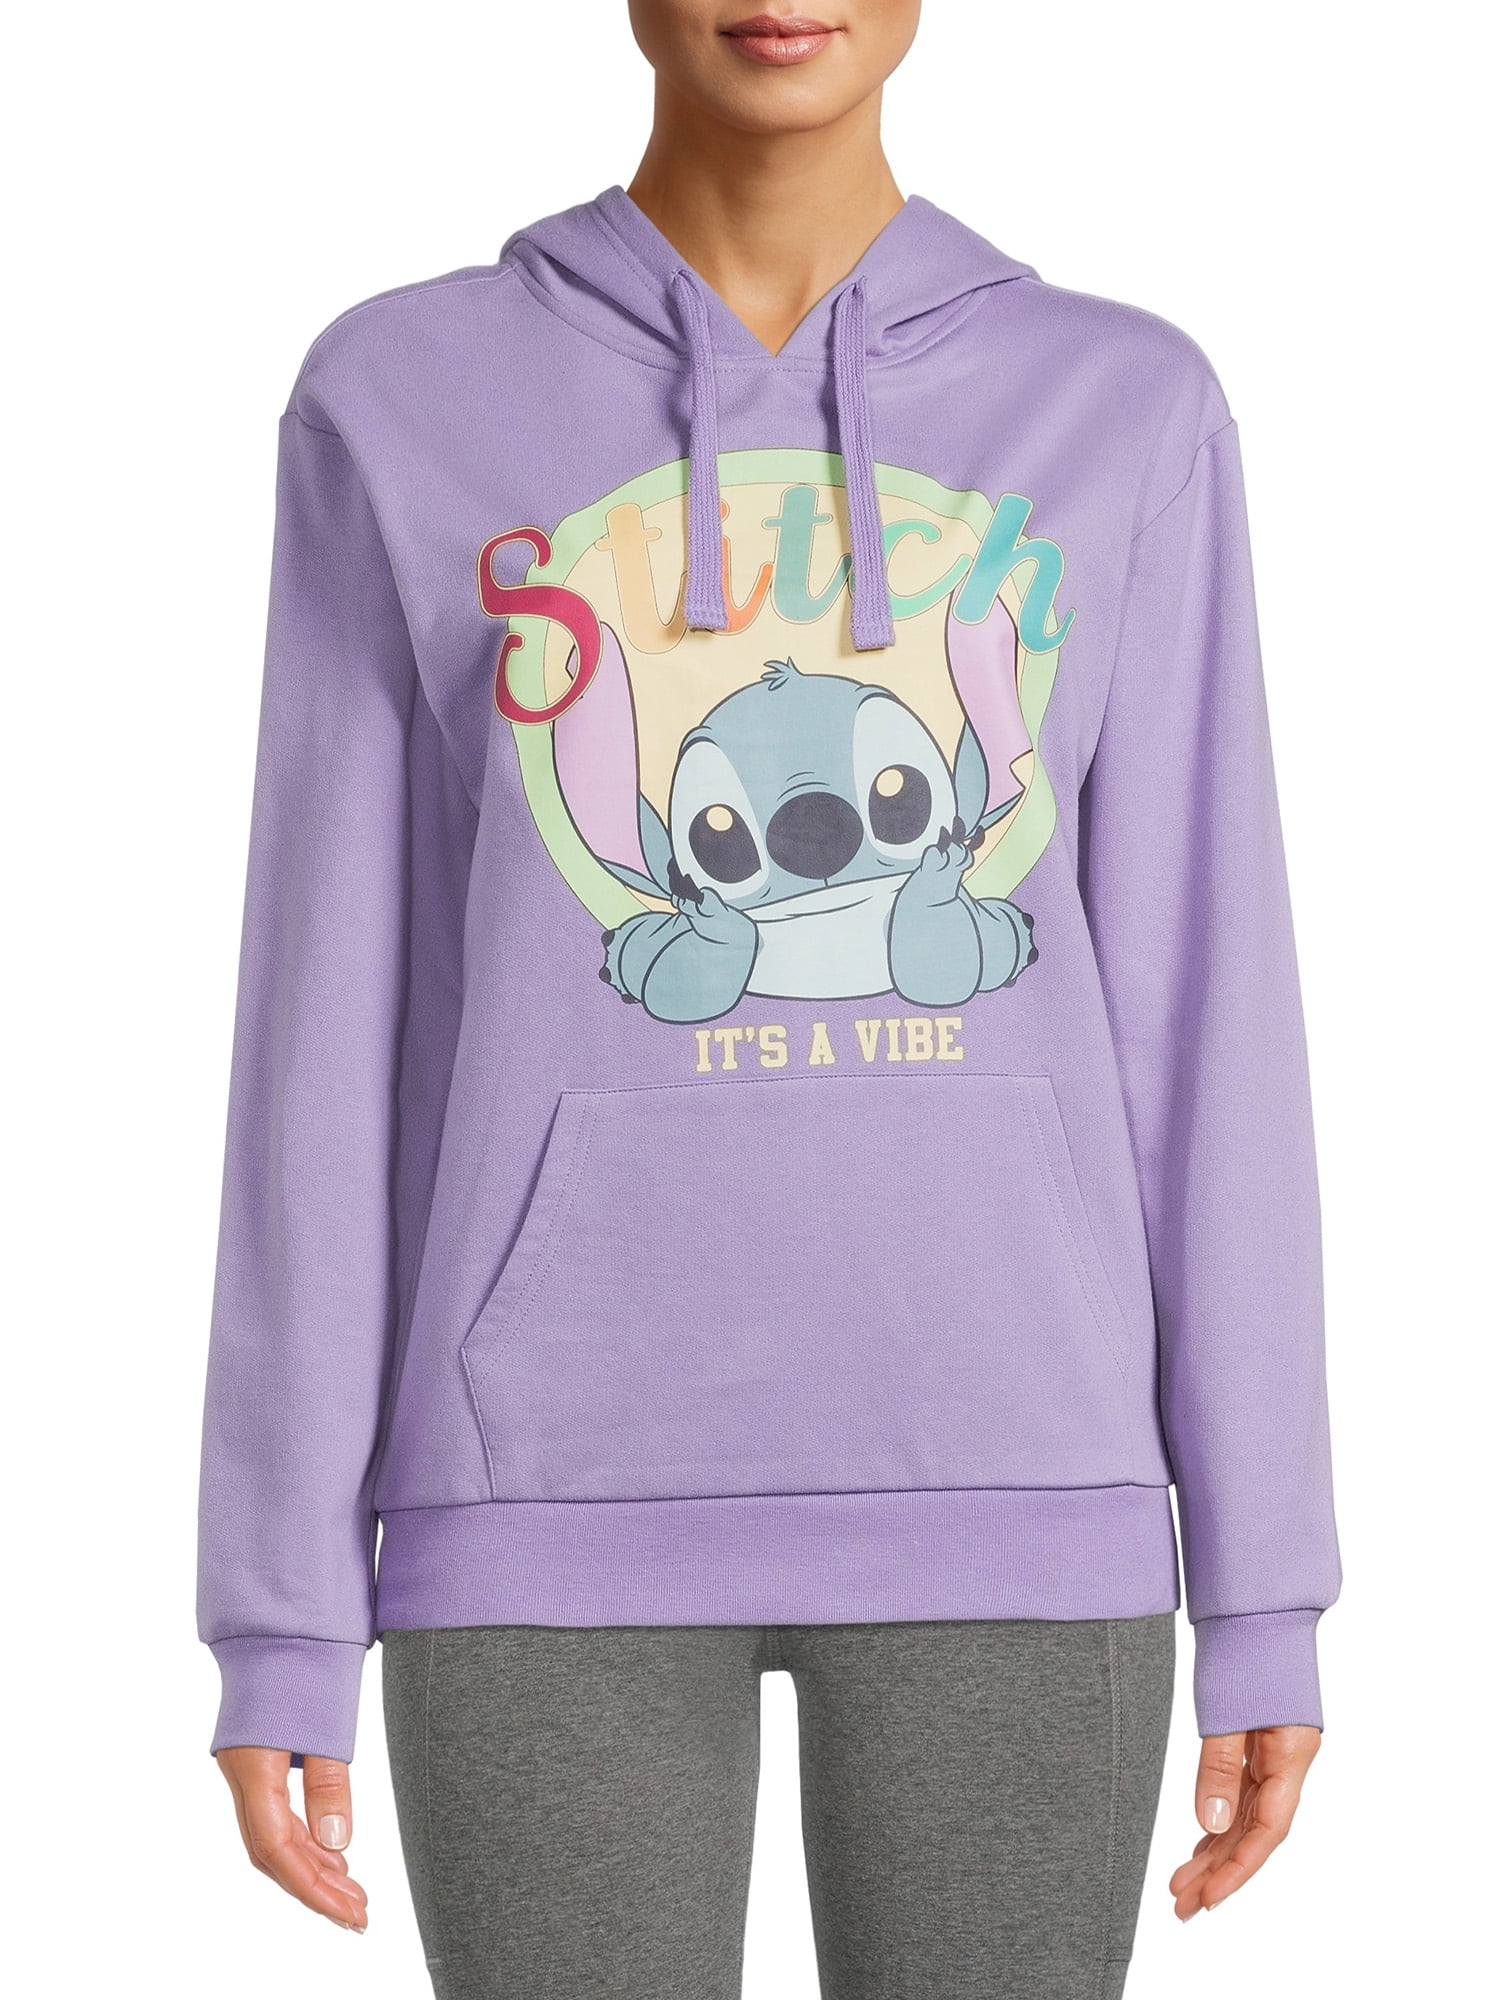 Stitch Women's Hoodie with Long Sleeves - Walmart.com